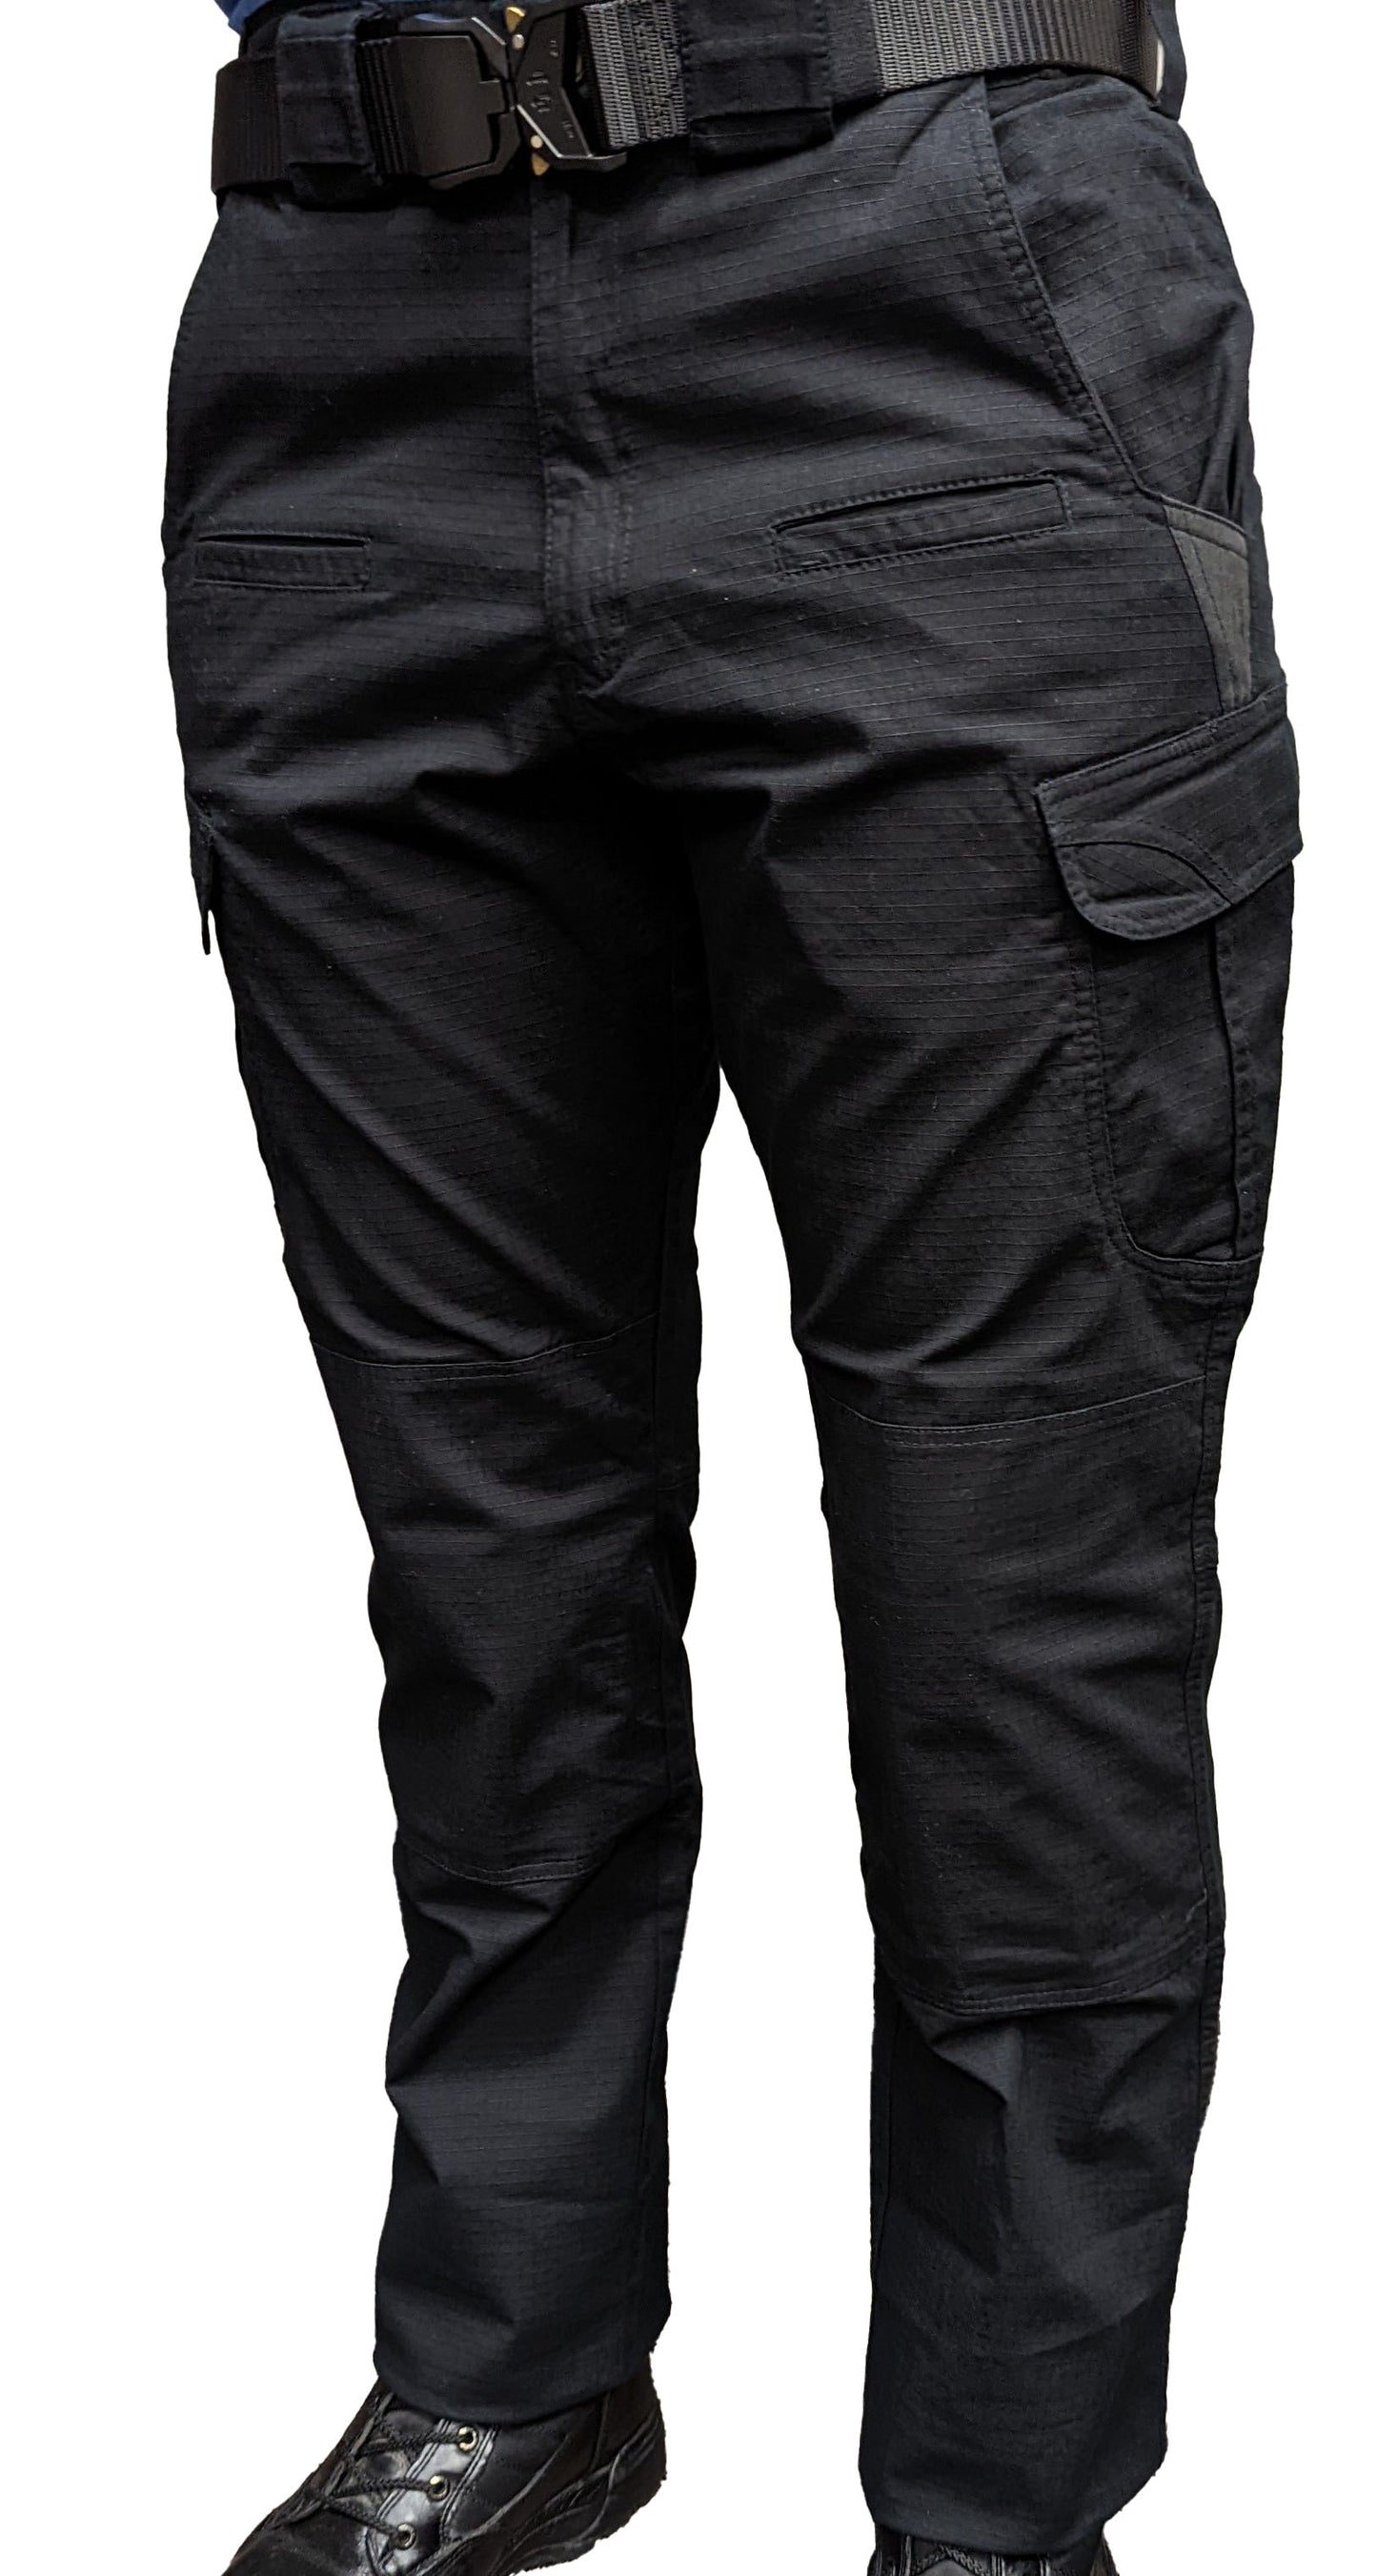 870 Police Pant - Unbraided (Women’s)